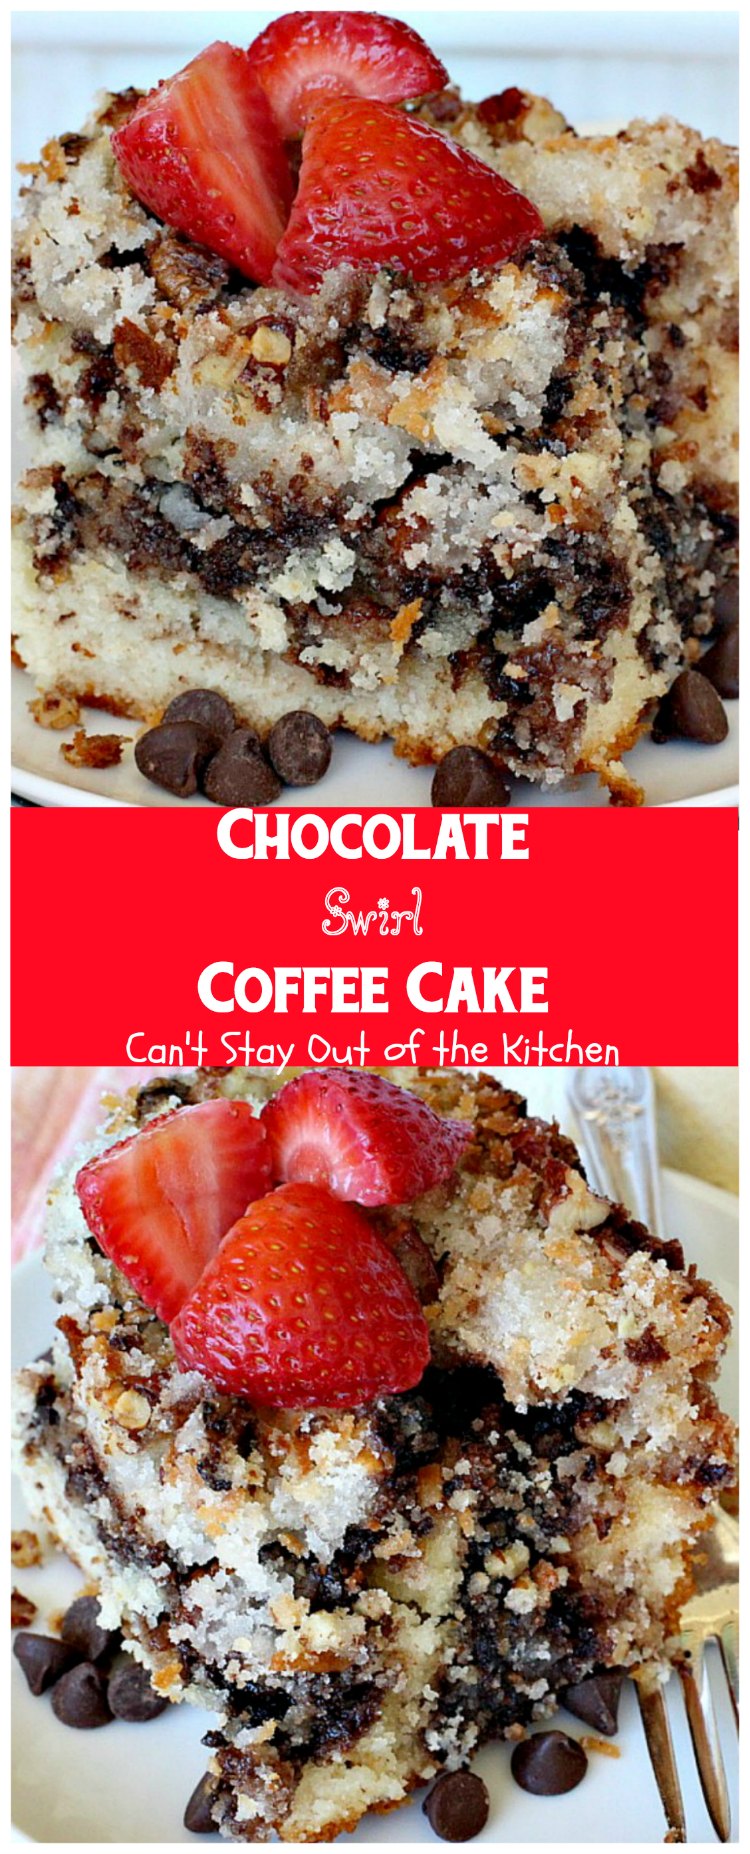 Chocolate Swirl Coffee Cake | Can't Stay Out of the Kitchen